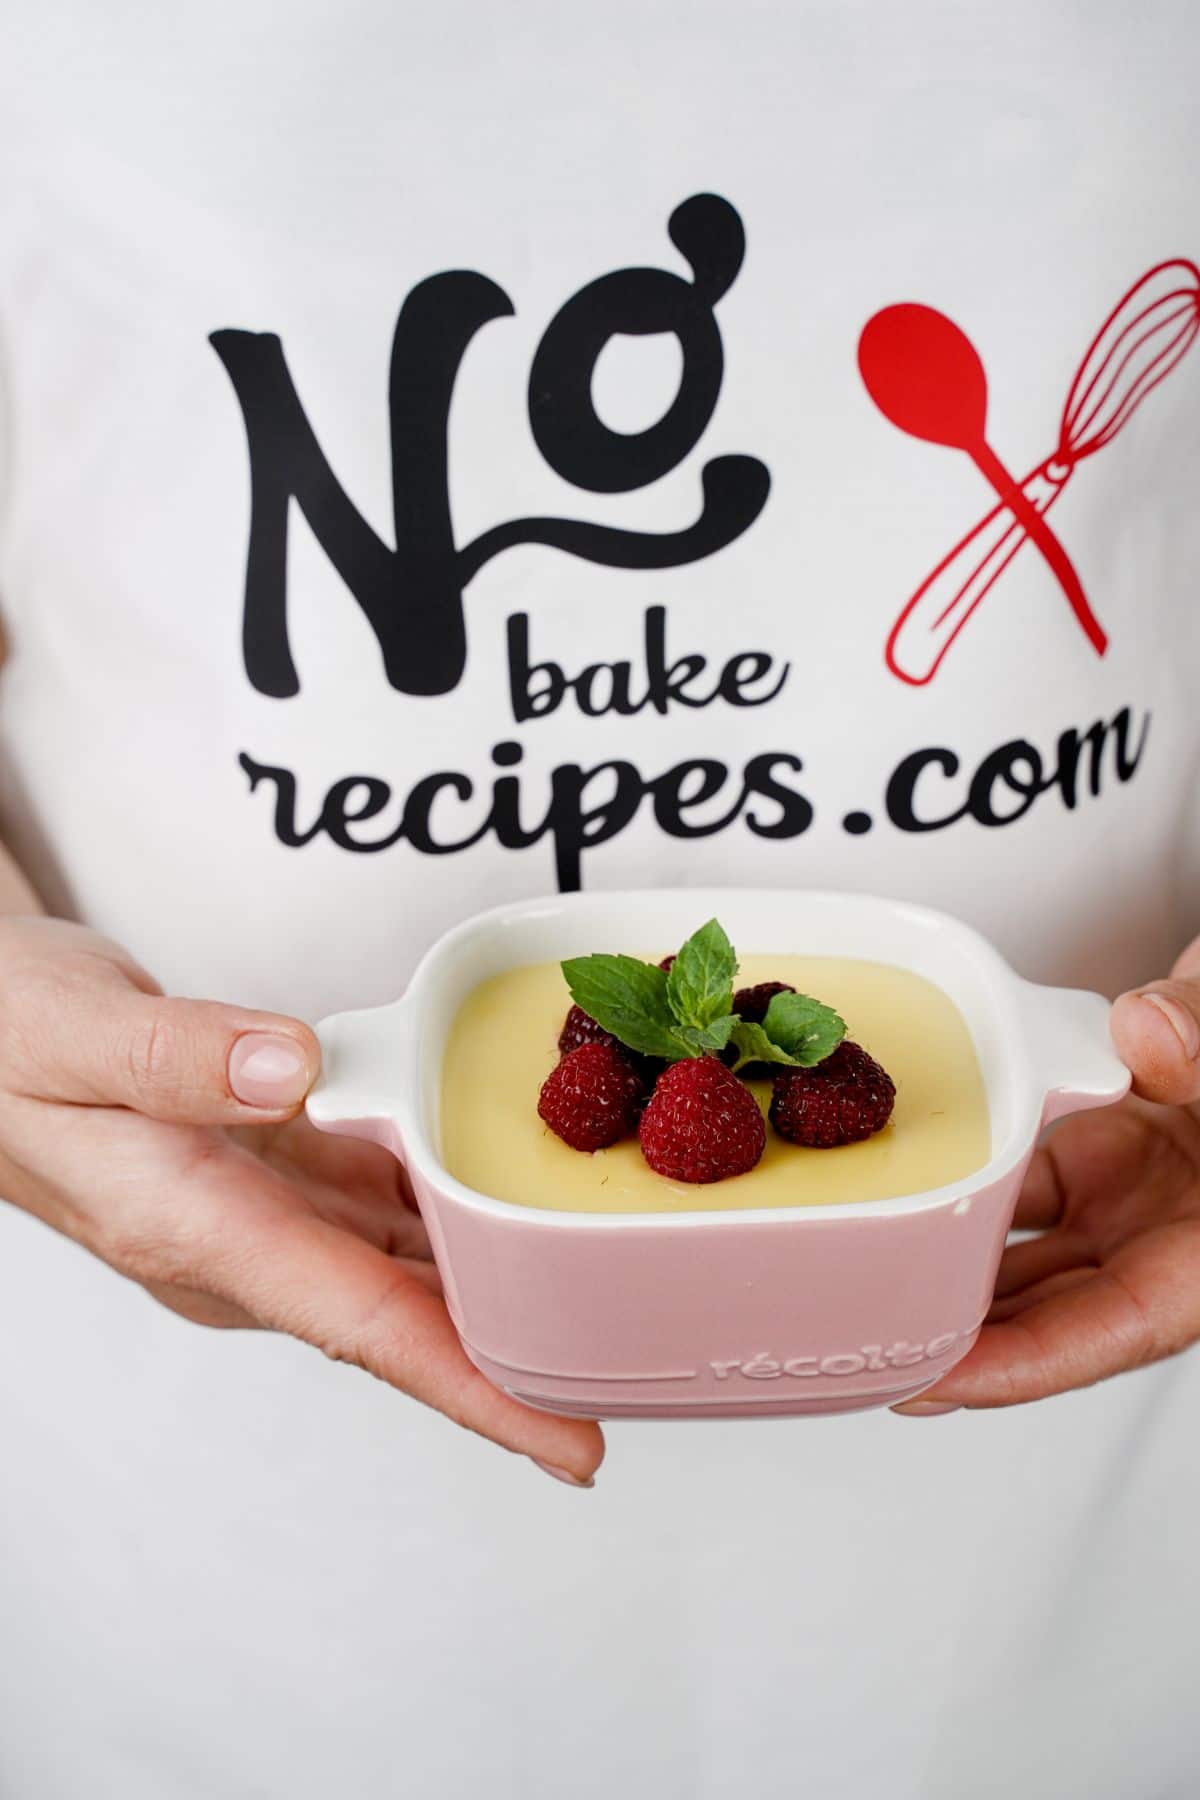 No-Bake Homemade Vanilla Pudding served in a bowl and decorated with some berries